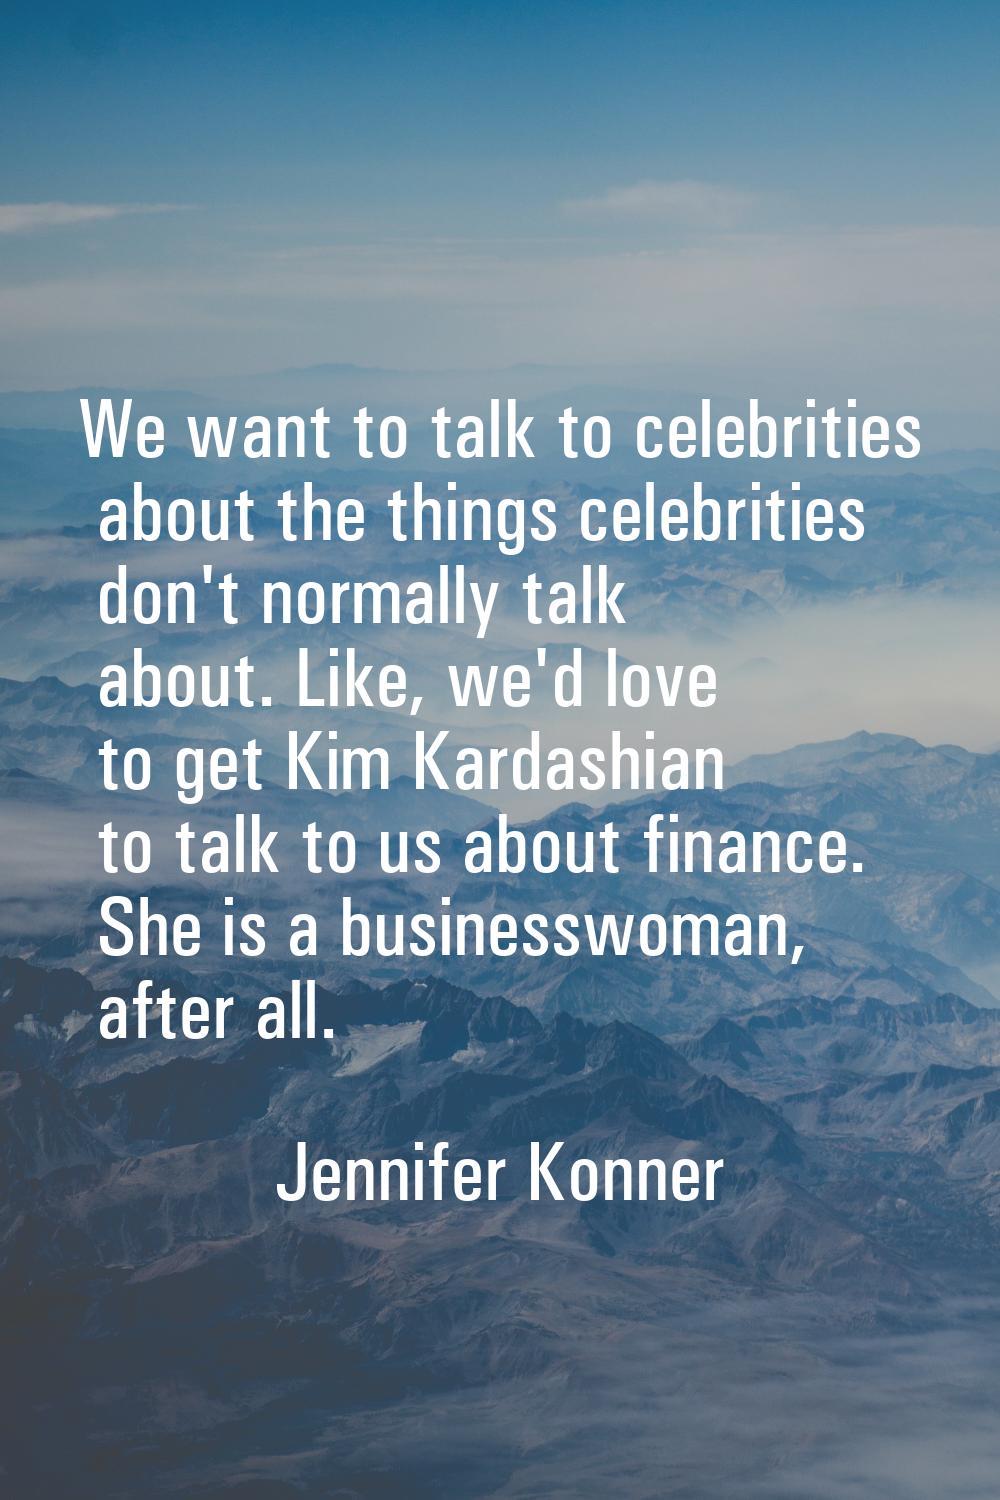 We want to talk to celebrities about the things celebrities don't normally talk about. Like, we'd l